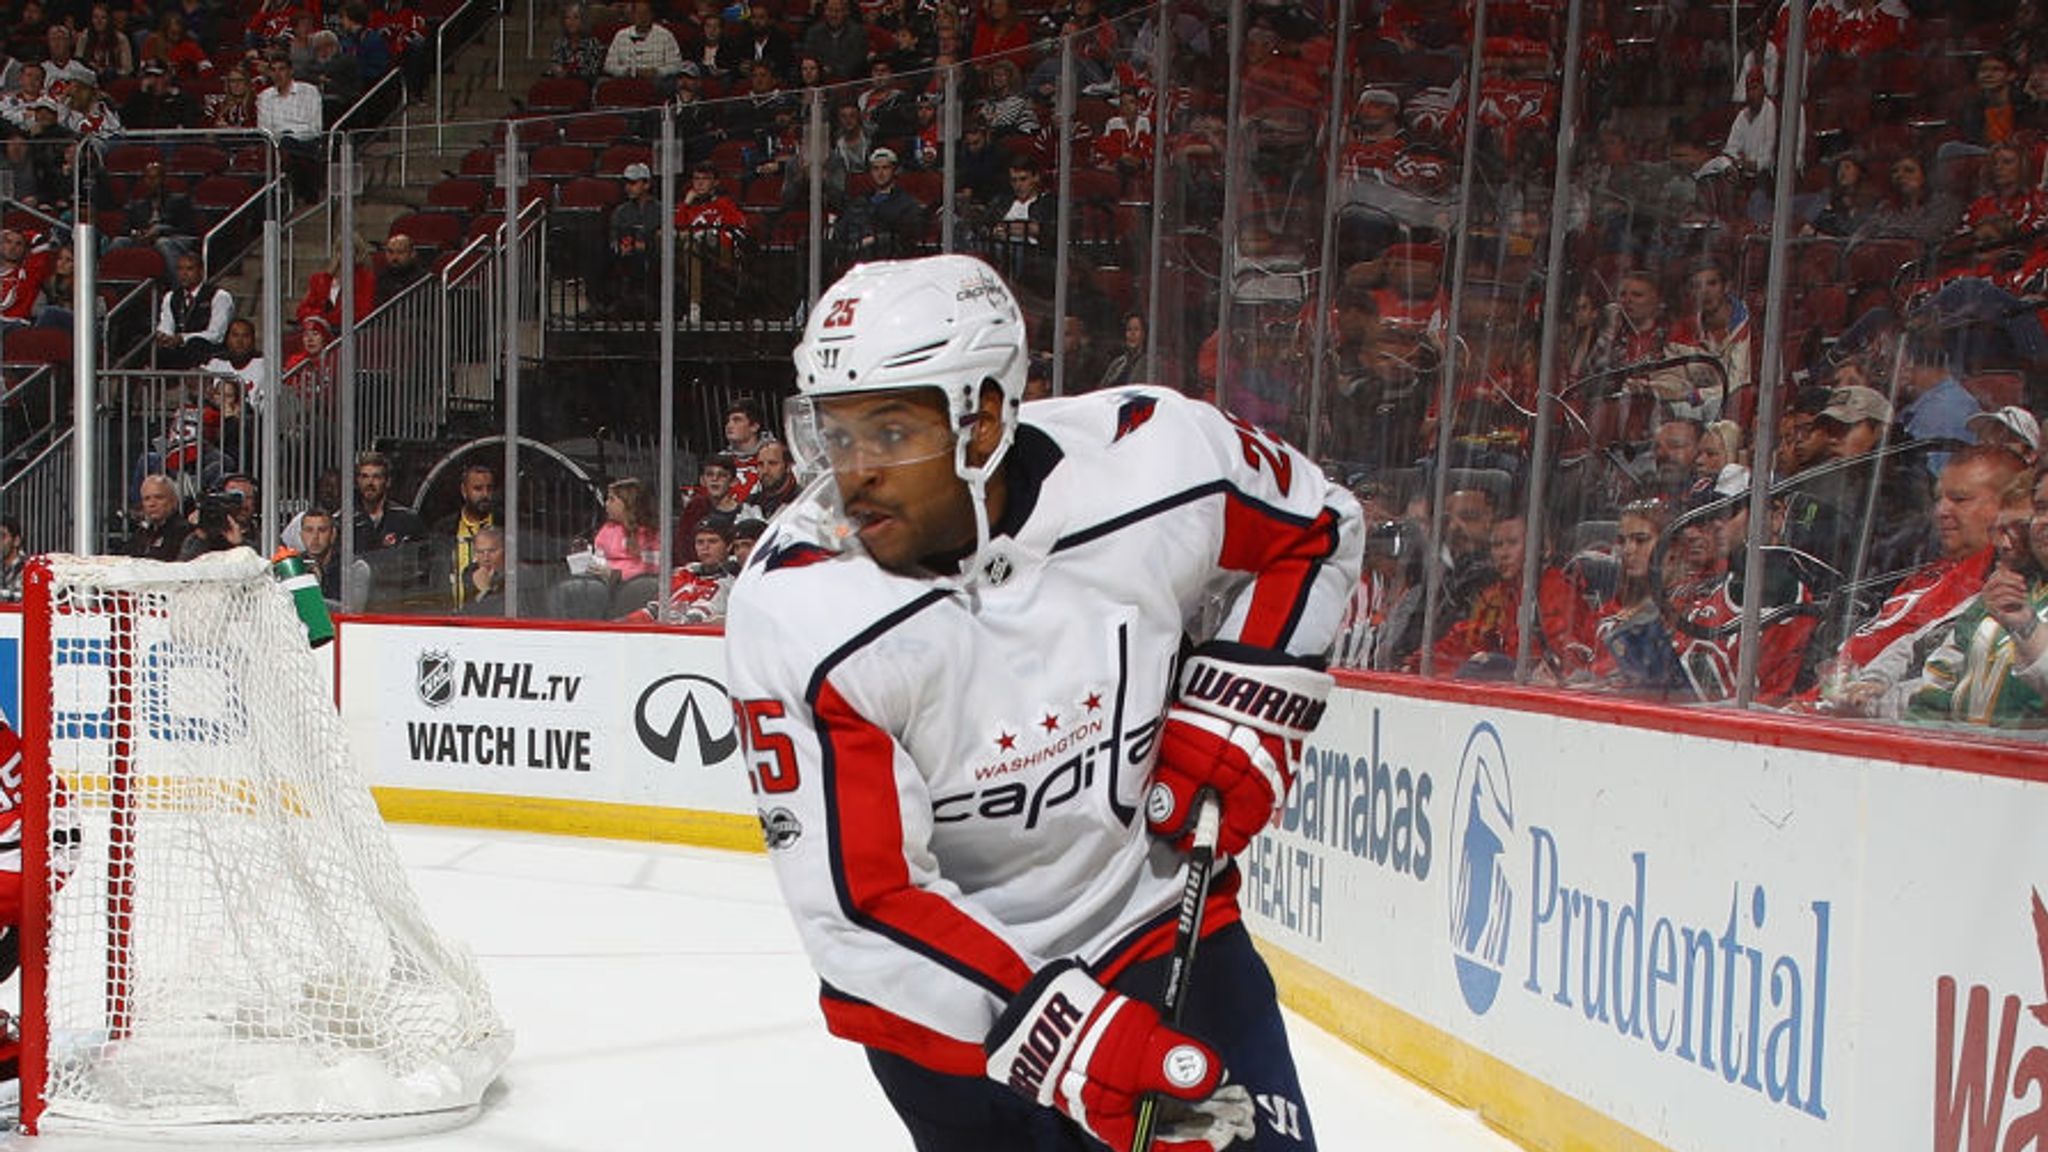 Devante Smith-Pelly dismayed by racist taunts during NHL game Ice Hockey News Sky Sports